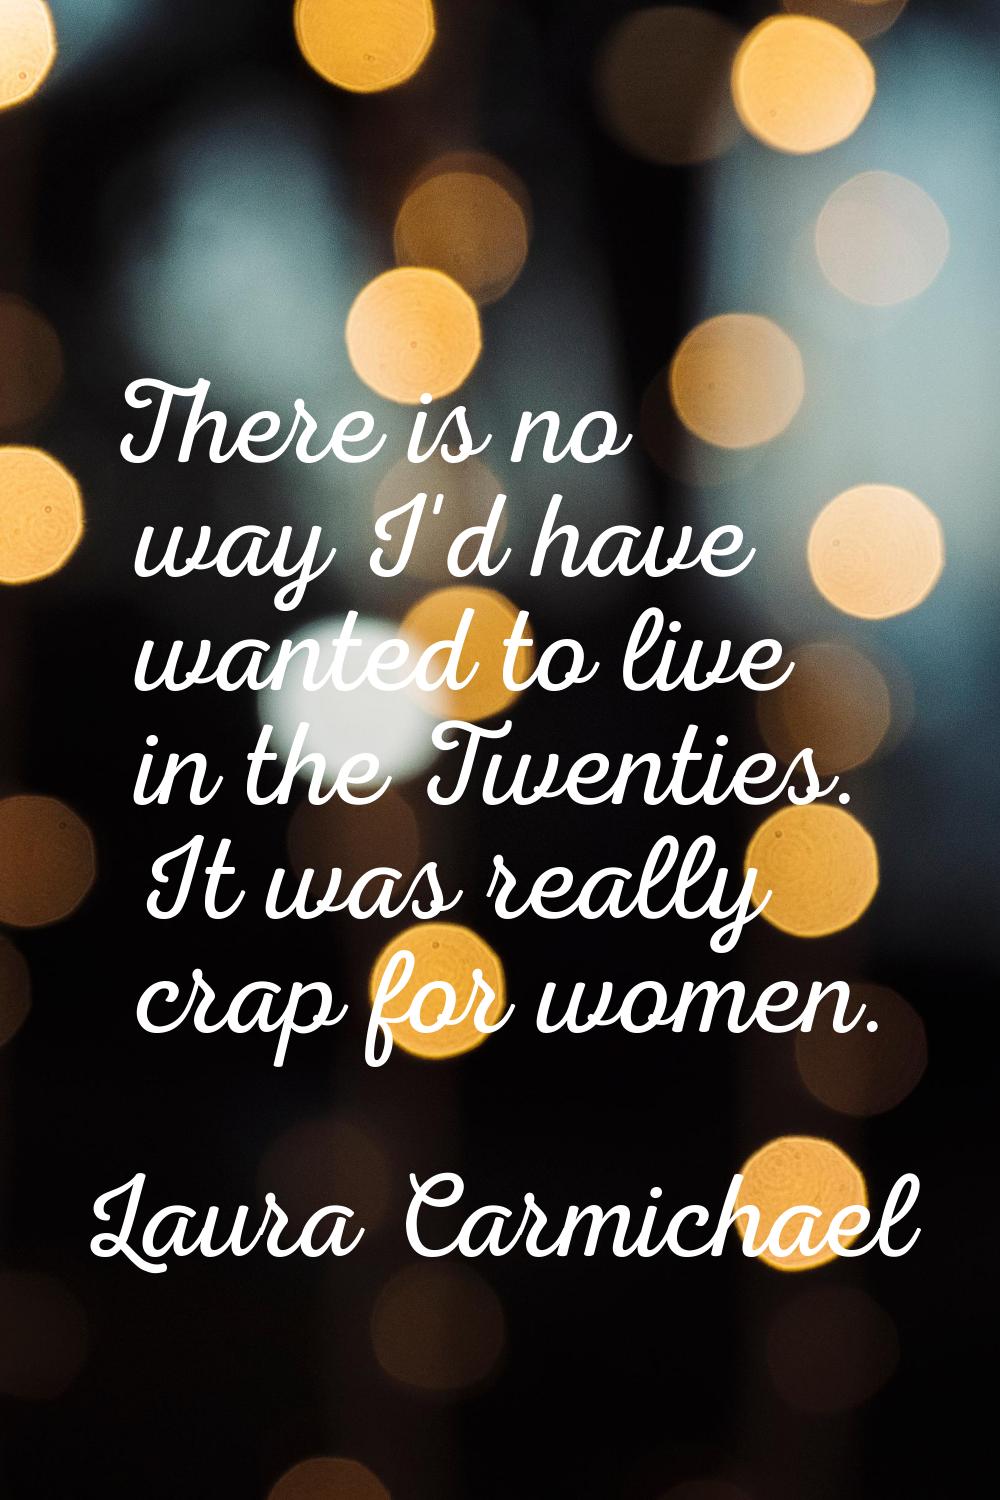 There is no way I'd have wanted to live in the Twenties. It was really crap for women.